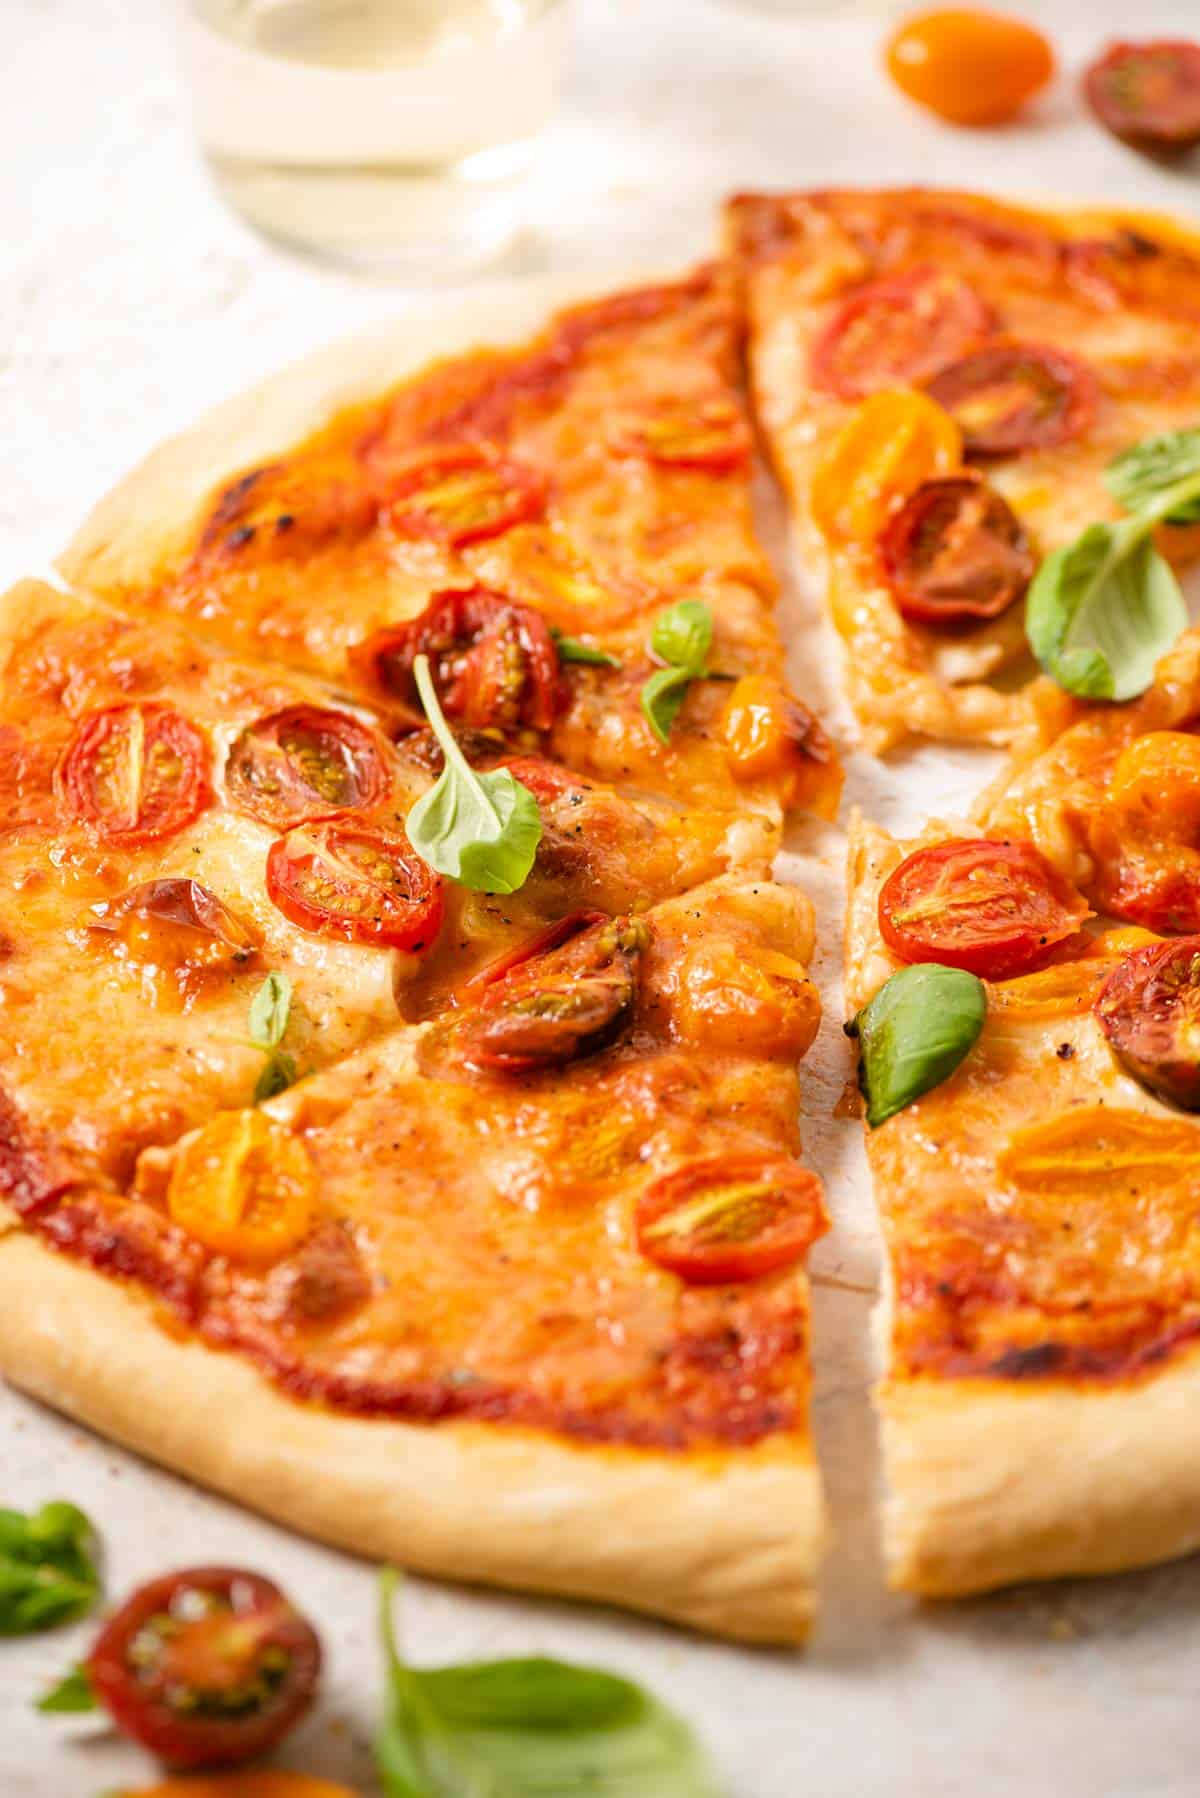 A close up of slices of pizza topped with cherry tomatoes and basil